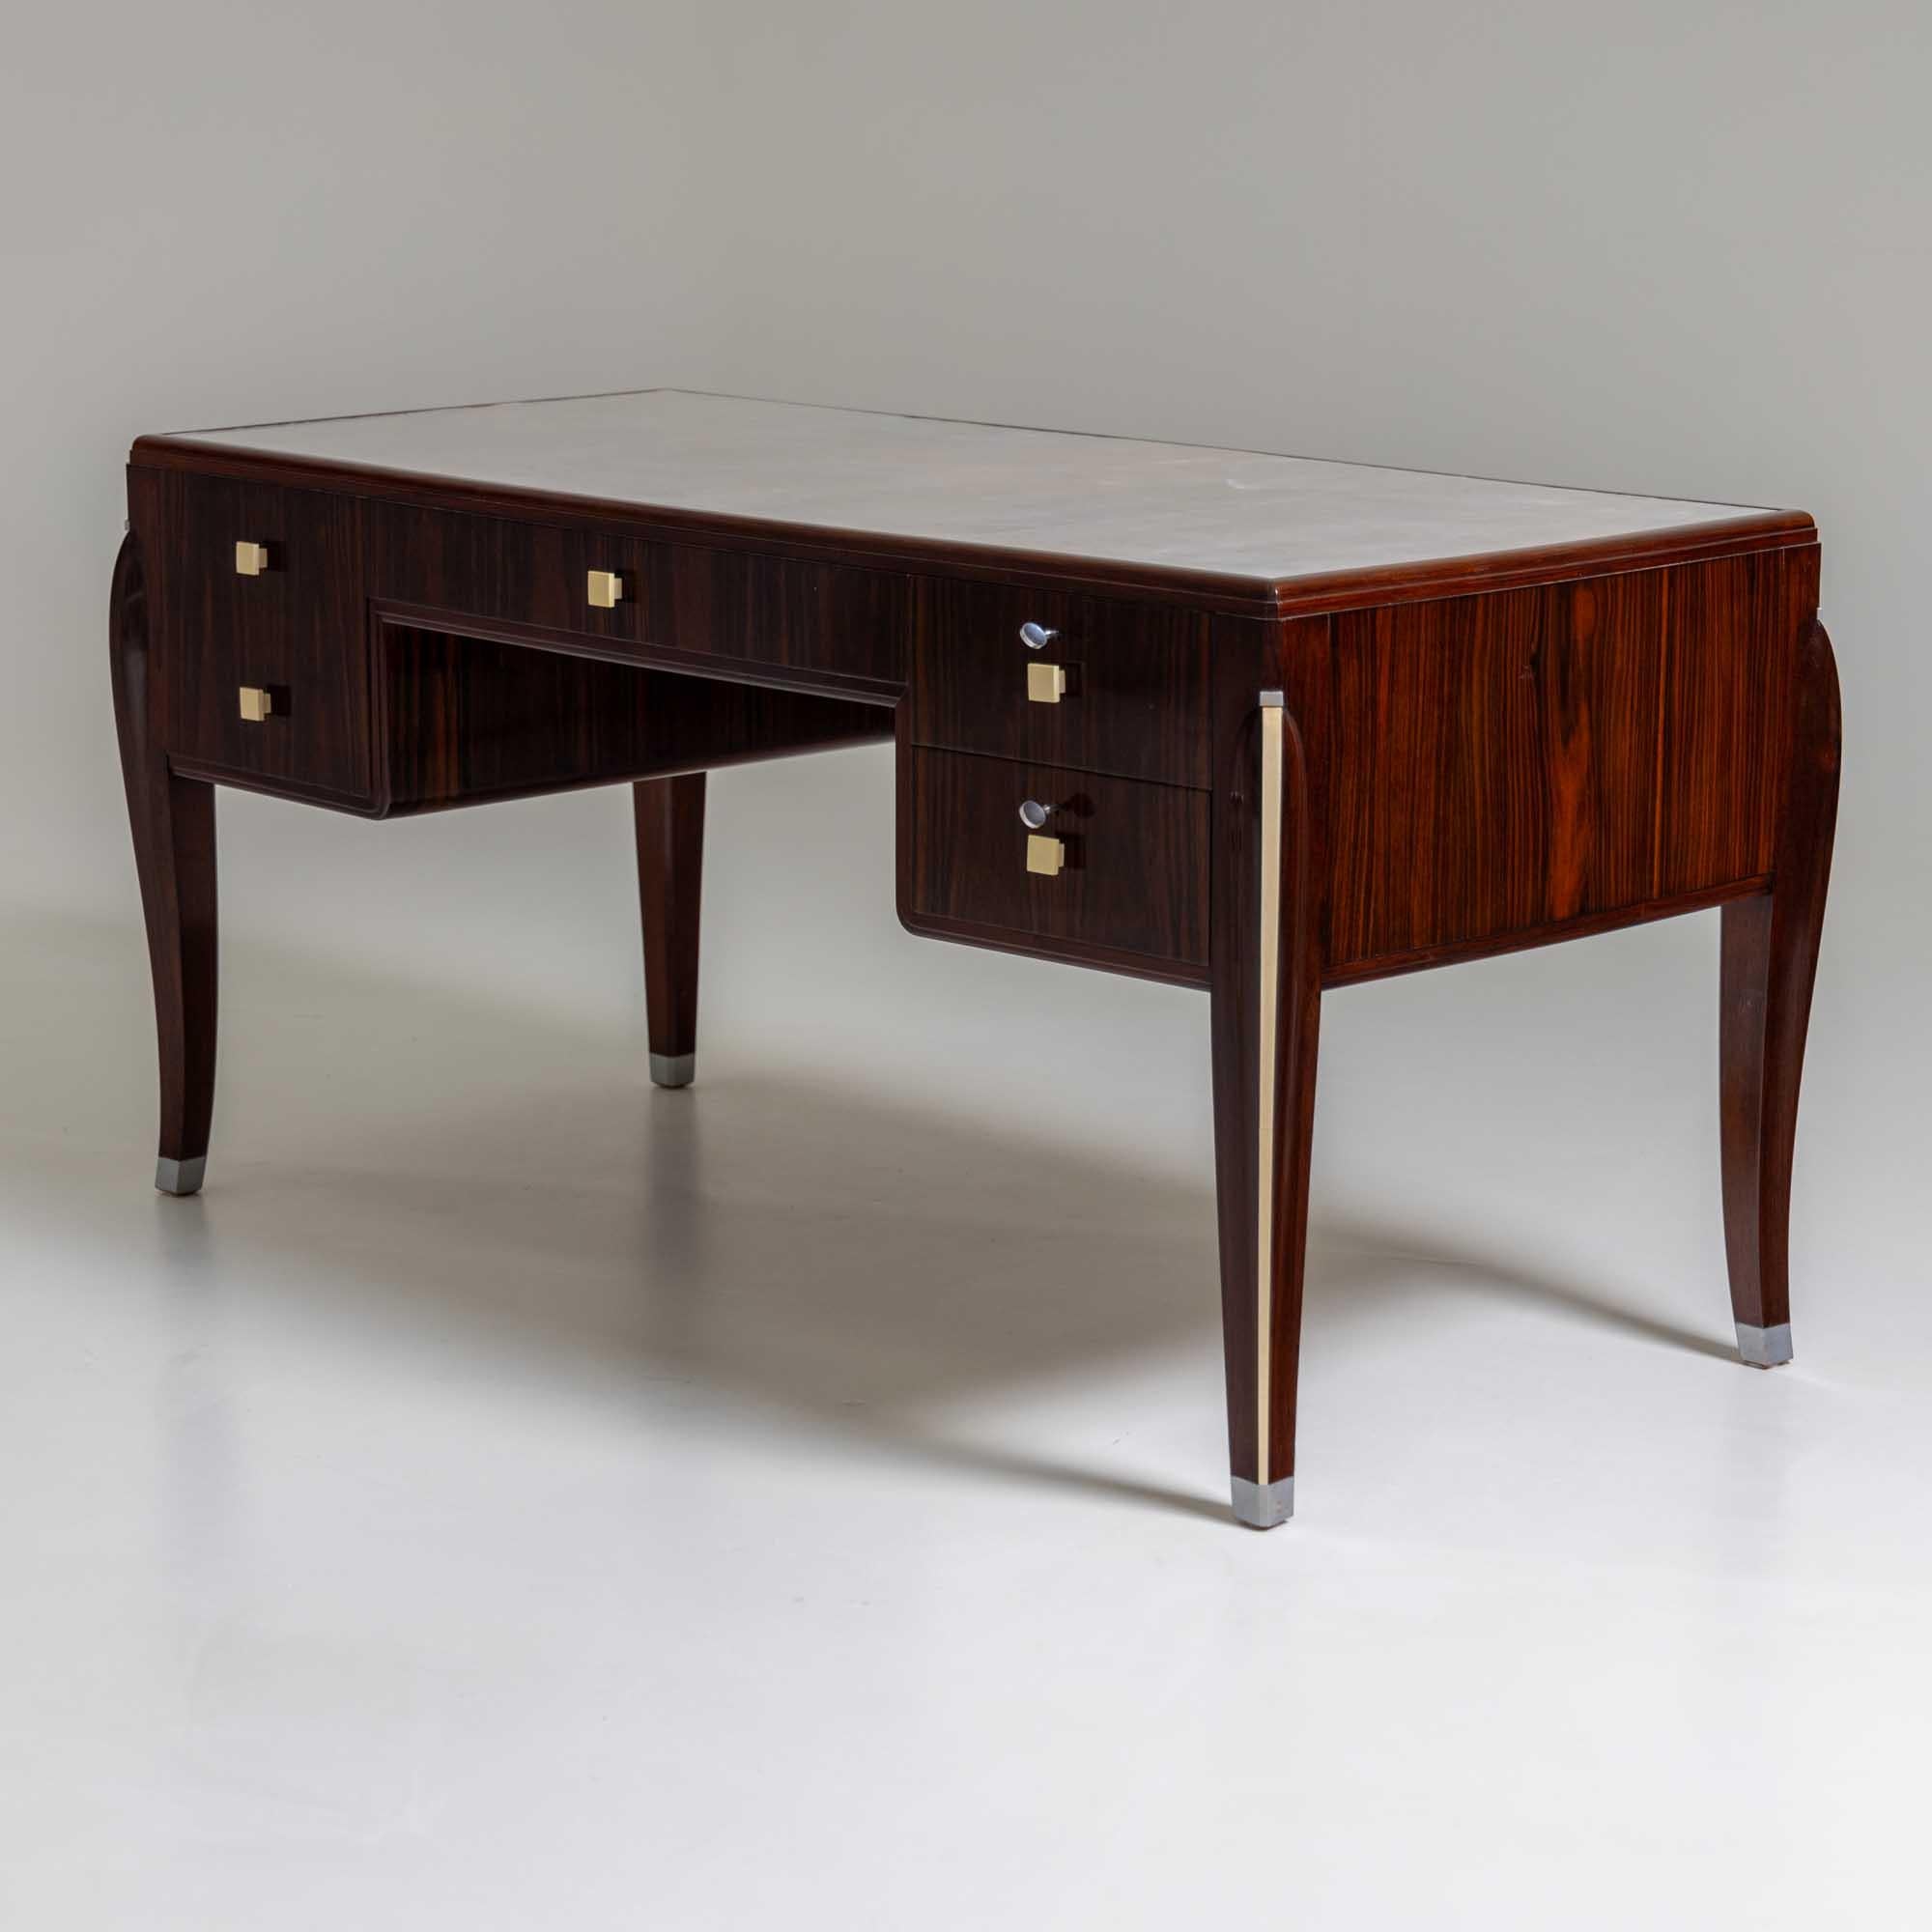 Art Deco Desk in the style of Jacques-Emile Ruhlmann (1879-1933), France, 1920s For Sale 5